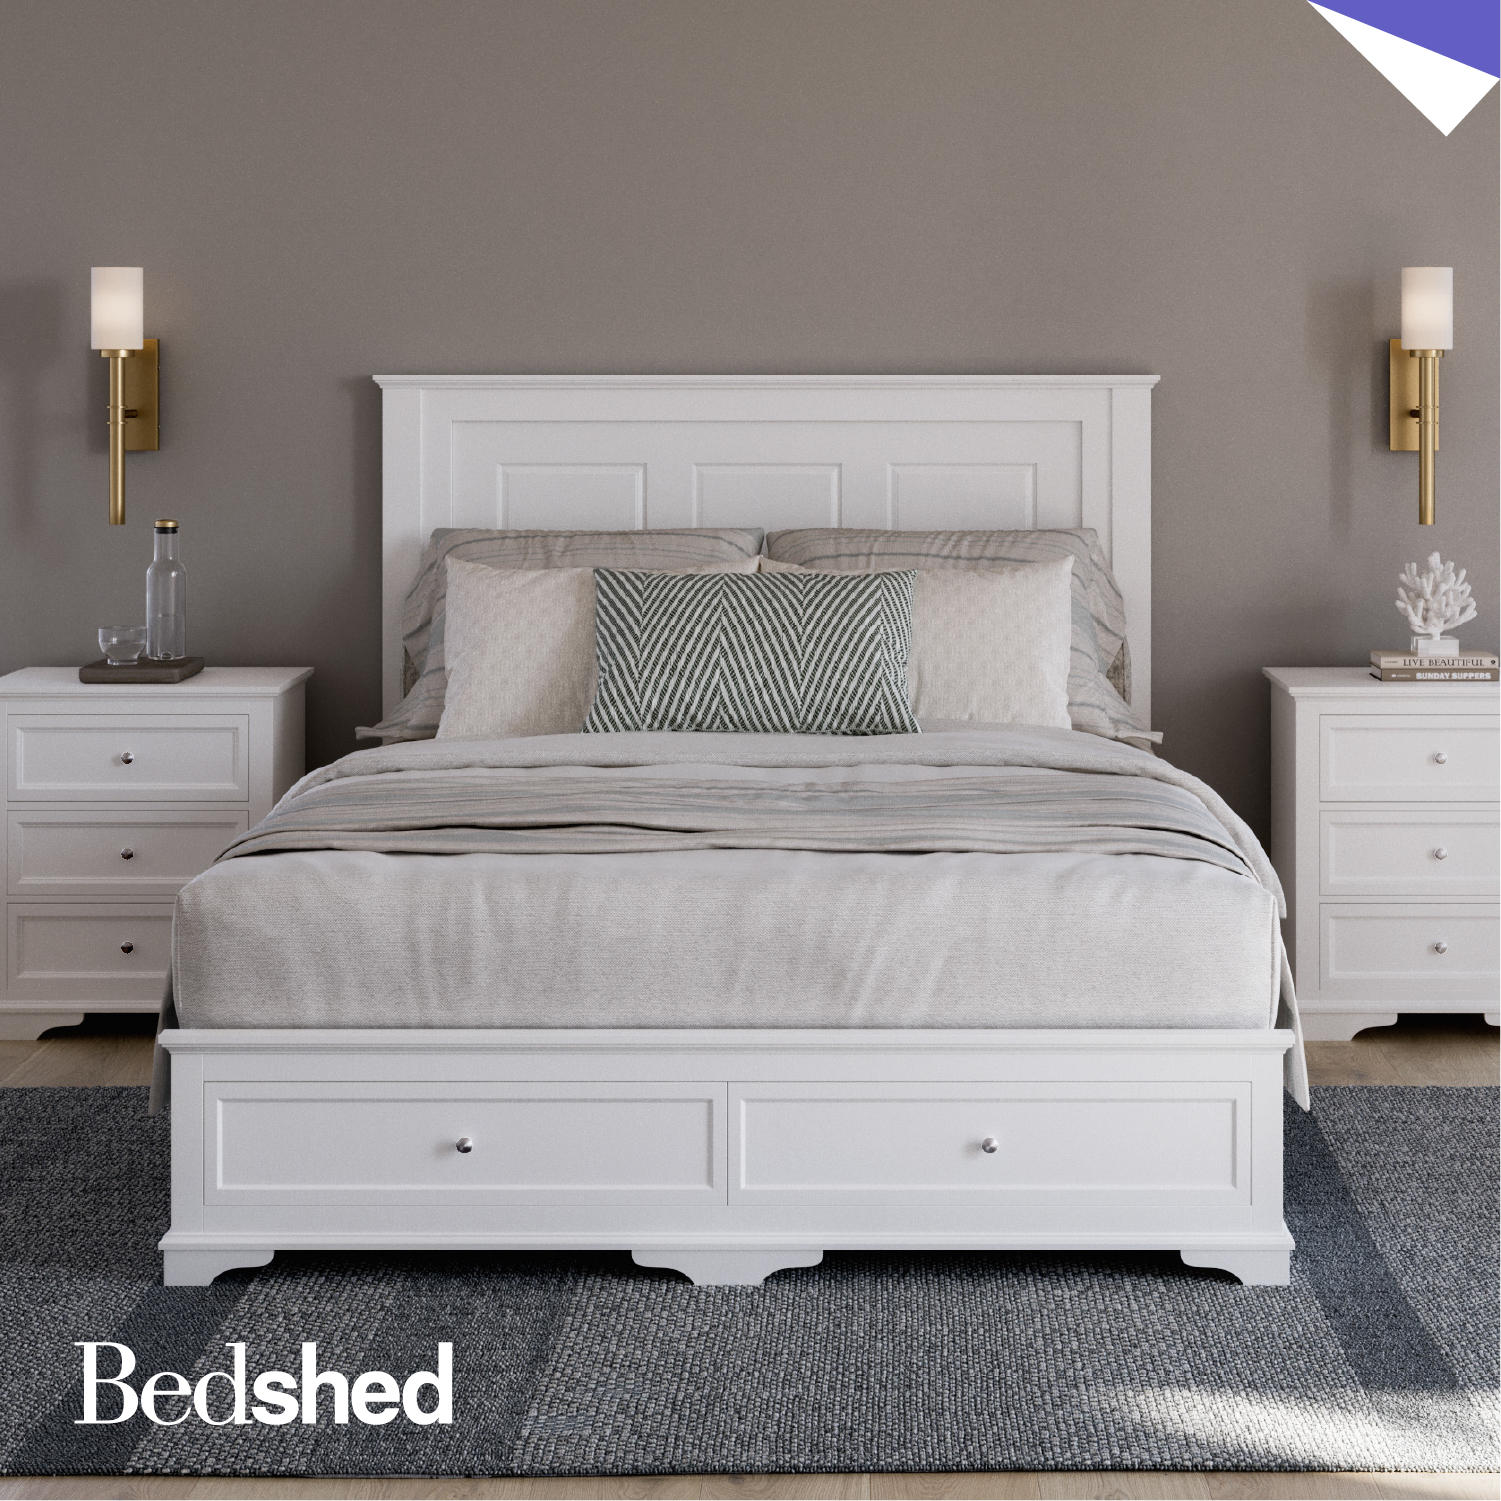 Cornwall Bed Frame Bedshed Busselton Busselton (08) 9752 4299